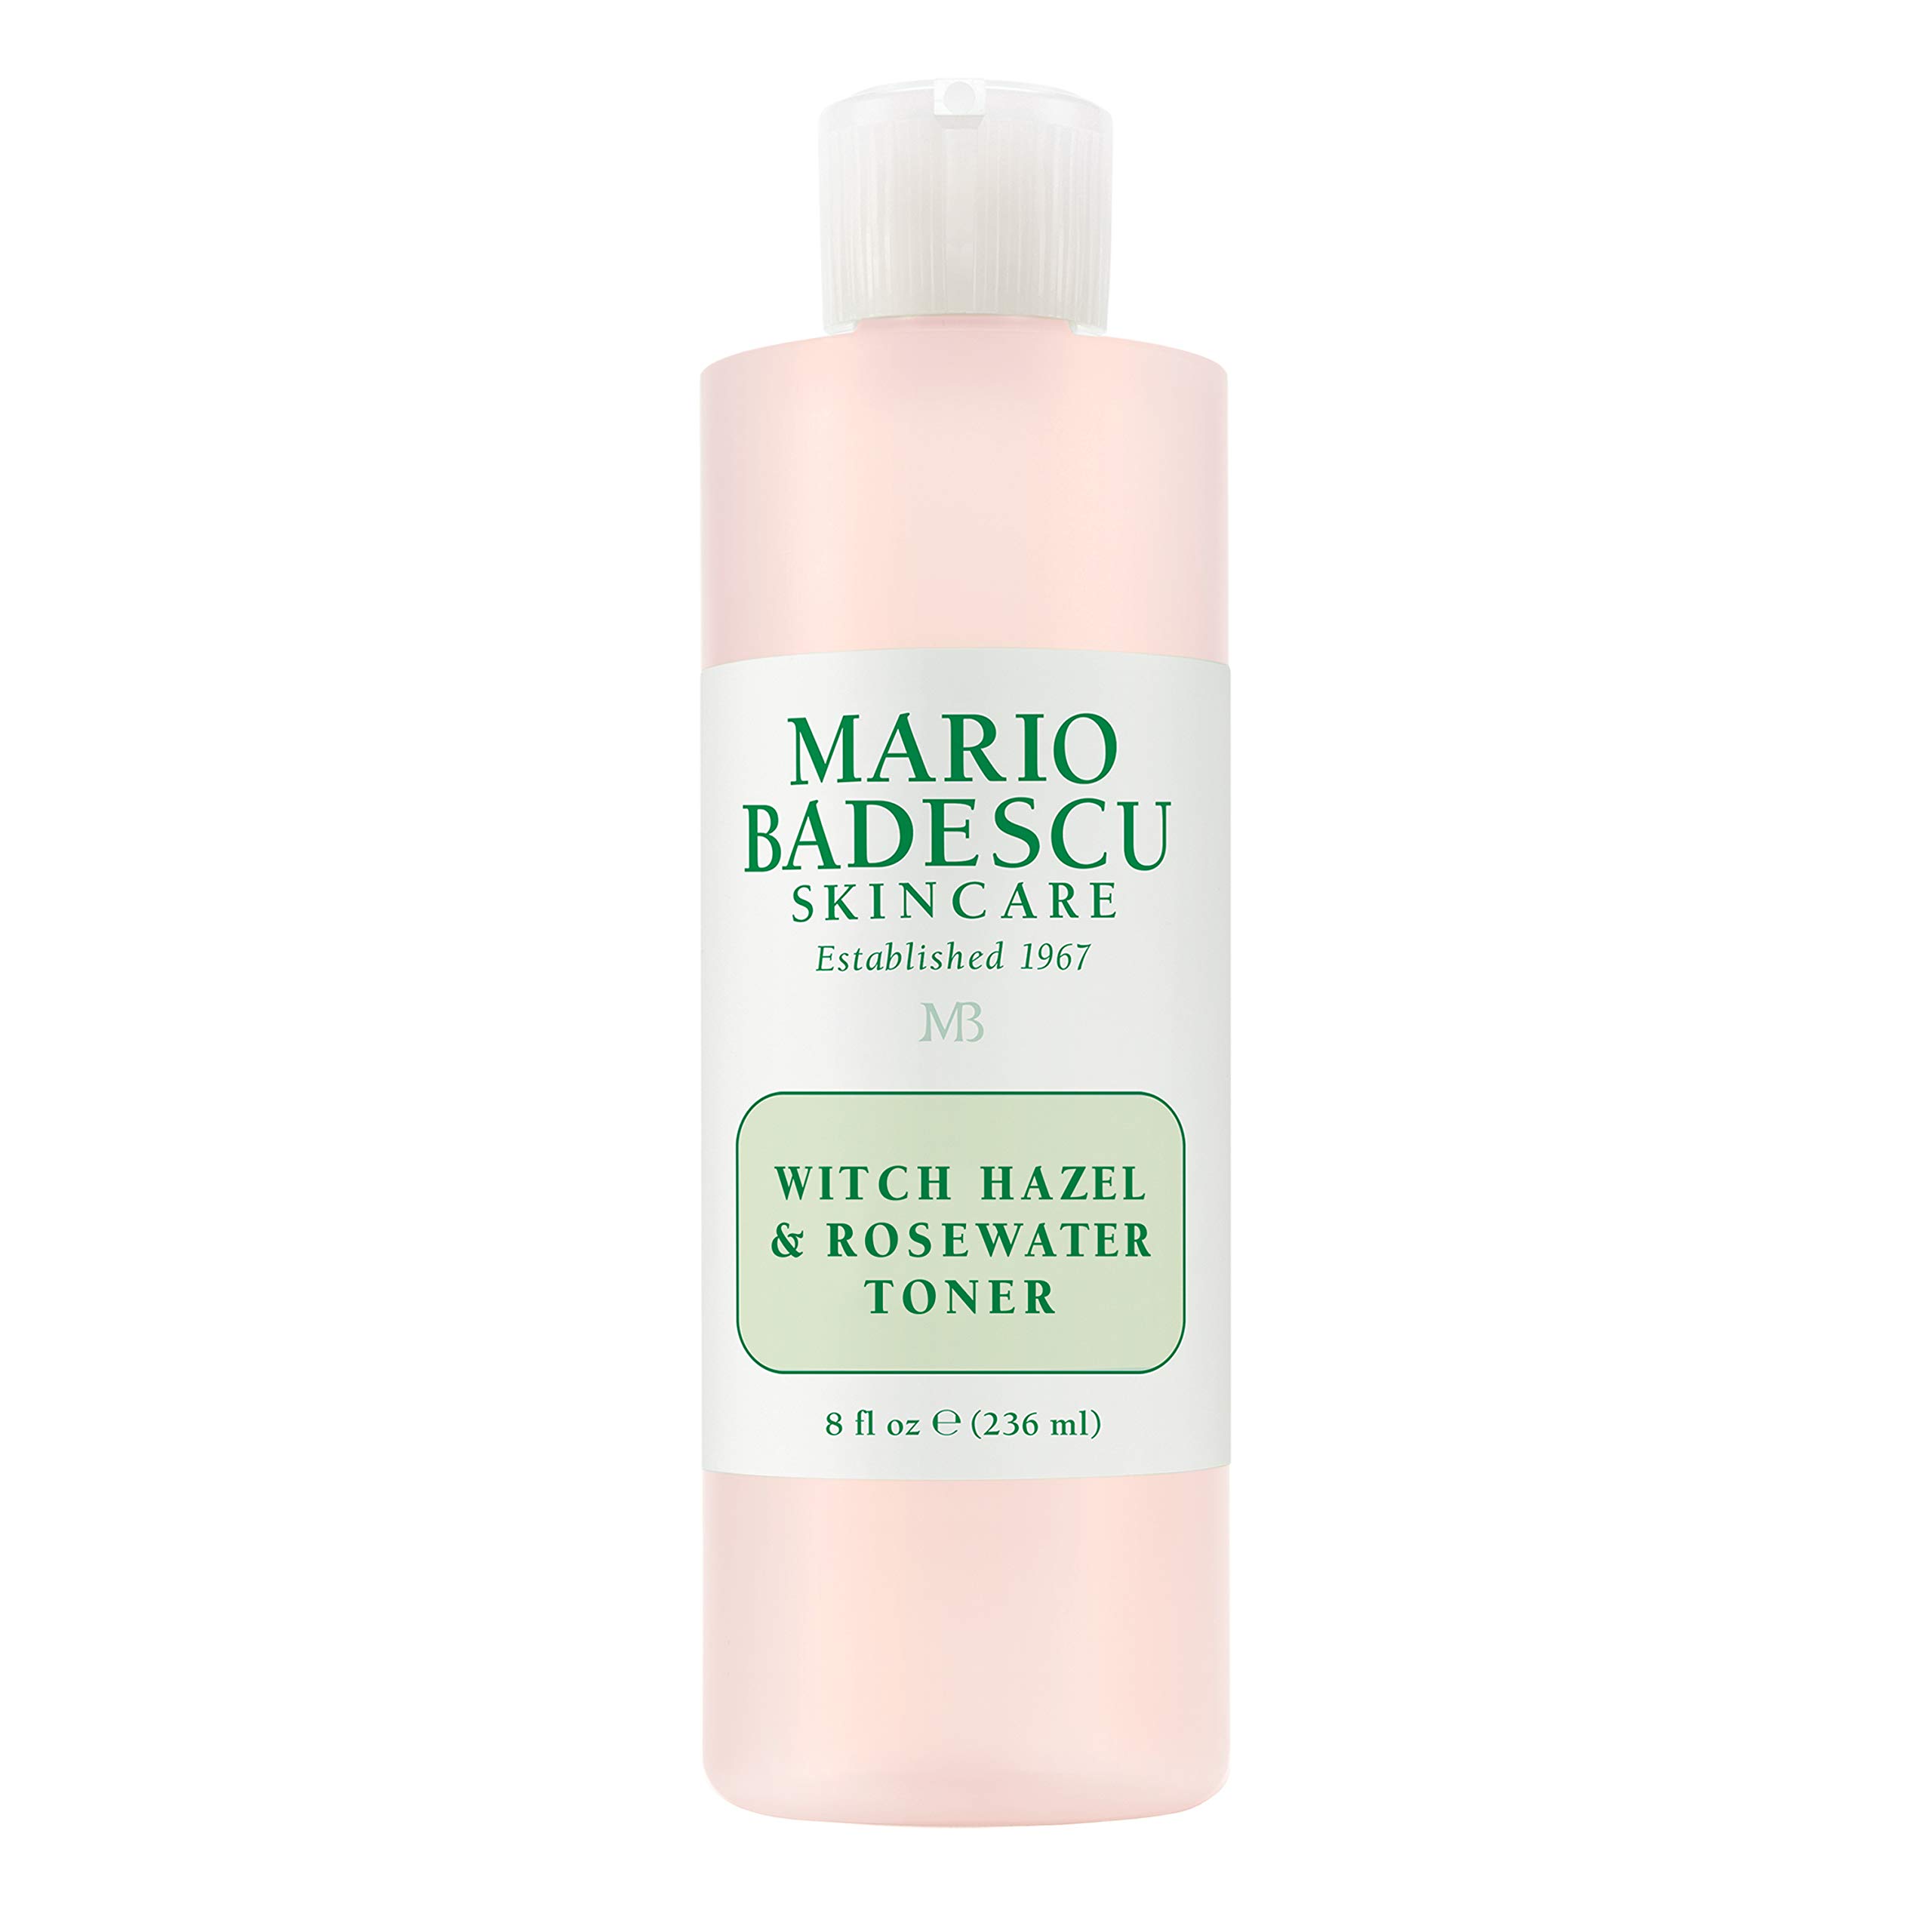 Mario Badescu Alcohol Free Witch Hazel Facial Toner for Aging Skin, Infused with Lavender/Rose Water and Aloe Vera, Face Toner for Combination or Dry Skin, 8 Fl Oz